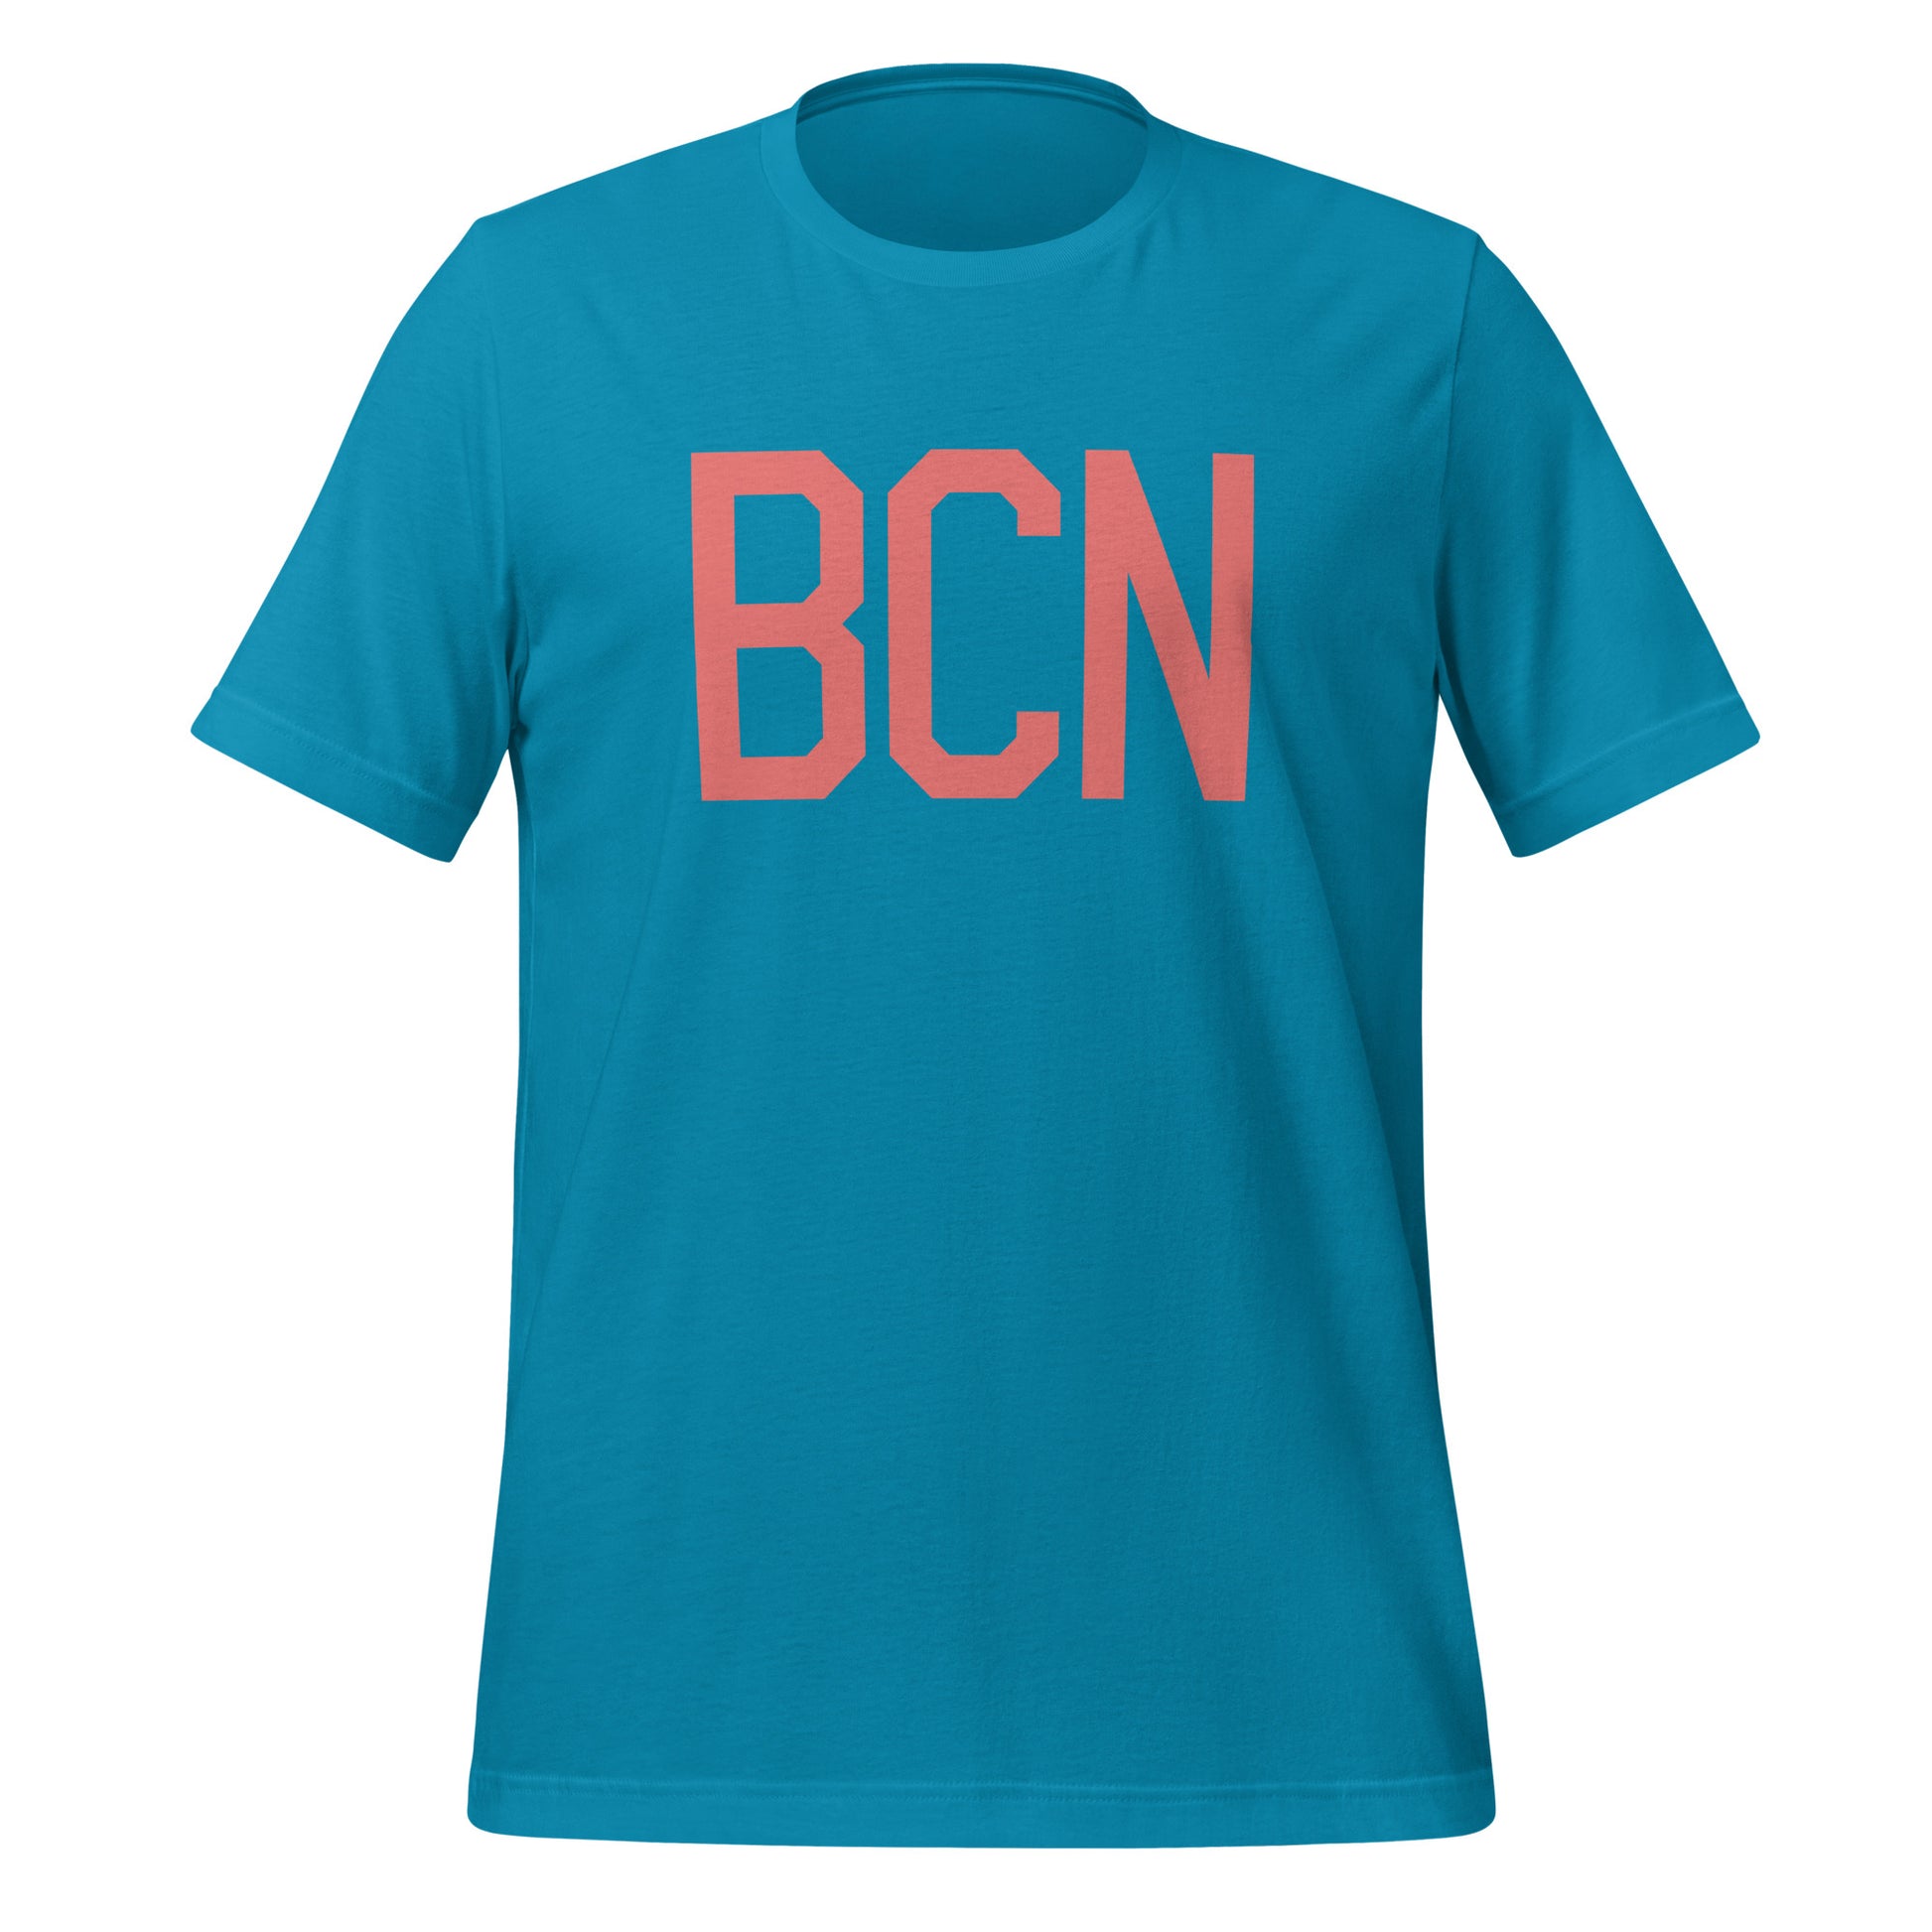 Aviation Enthusiast Unisex Tee - Pink Graphic • BCN Barcelona • YHM Designs - Image 06